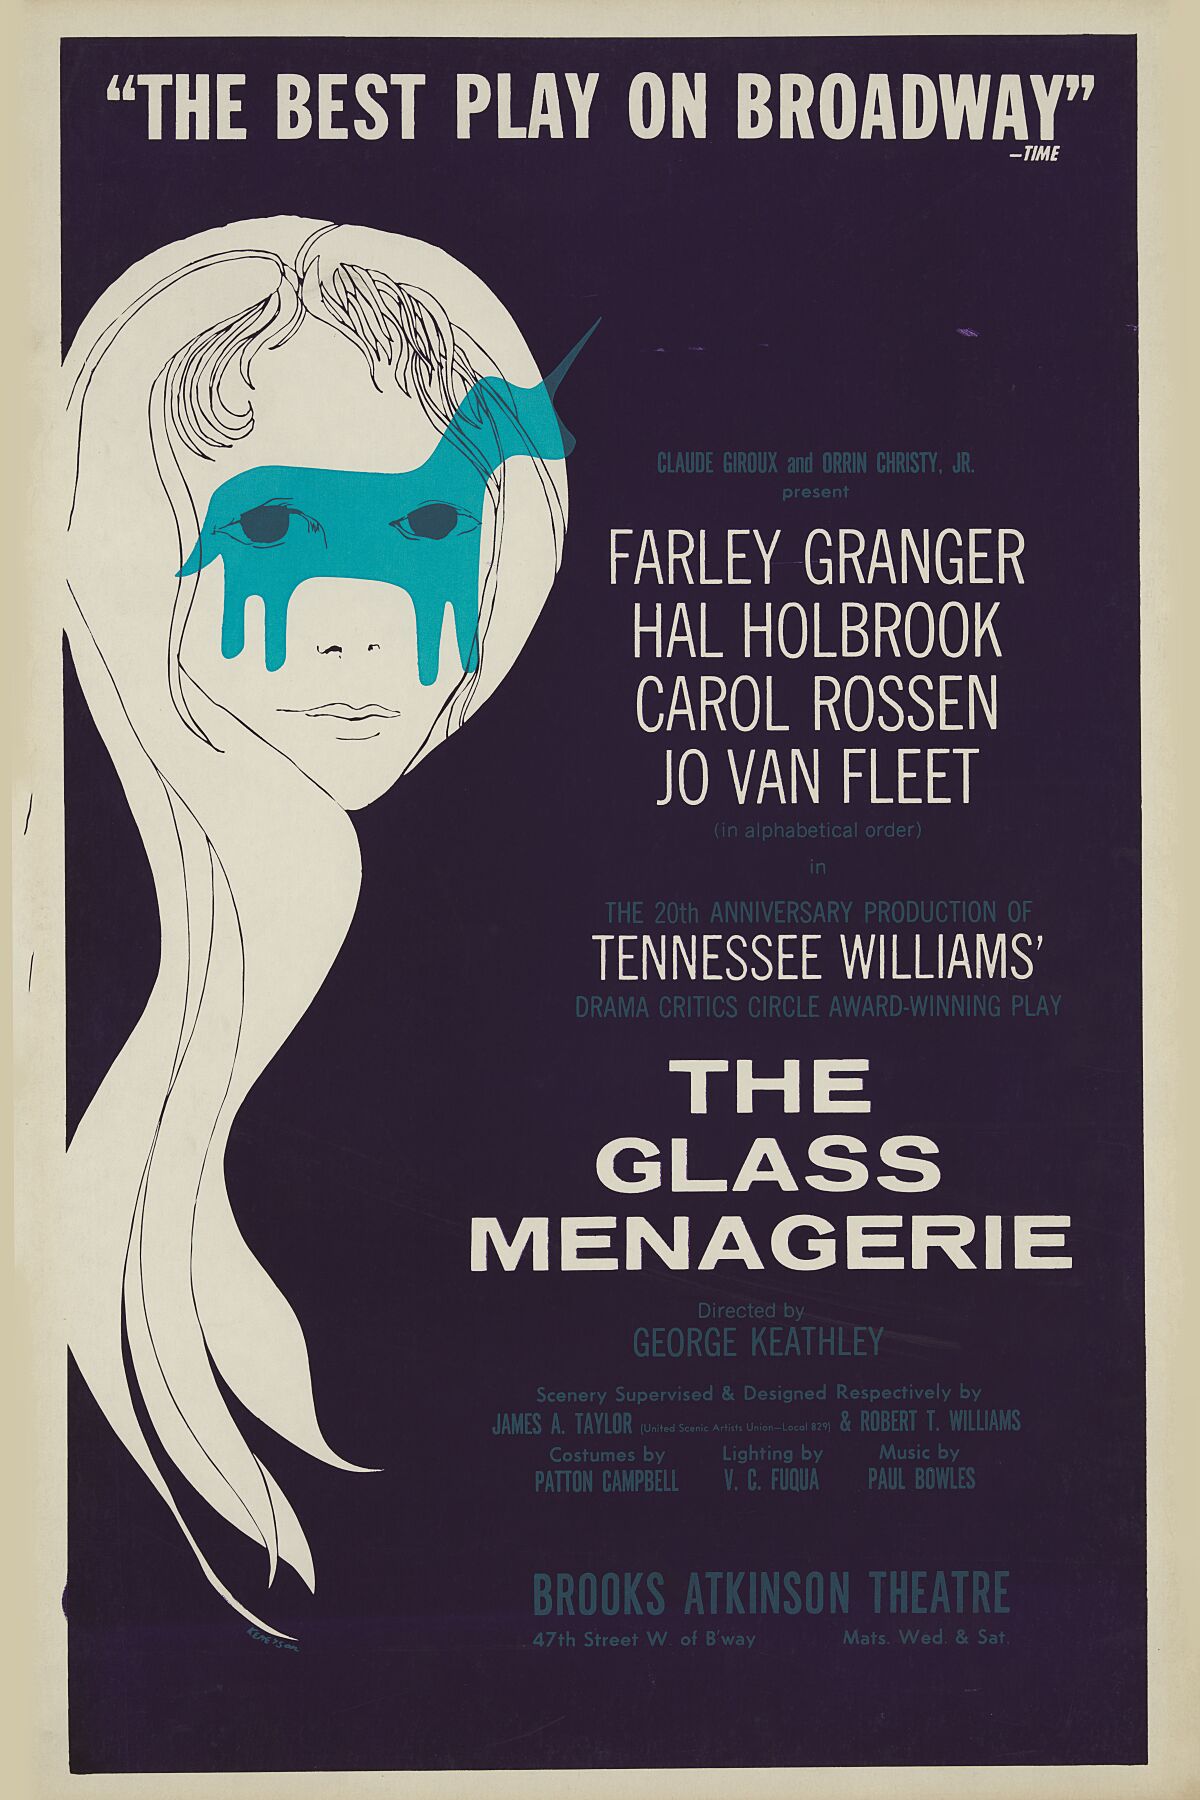 Poster for 'The Glass Menagerie' shows silhouette of a unicorn transposed on a woman's face. 1965